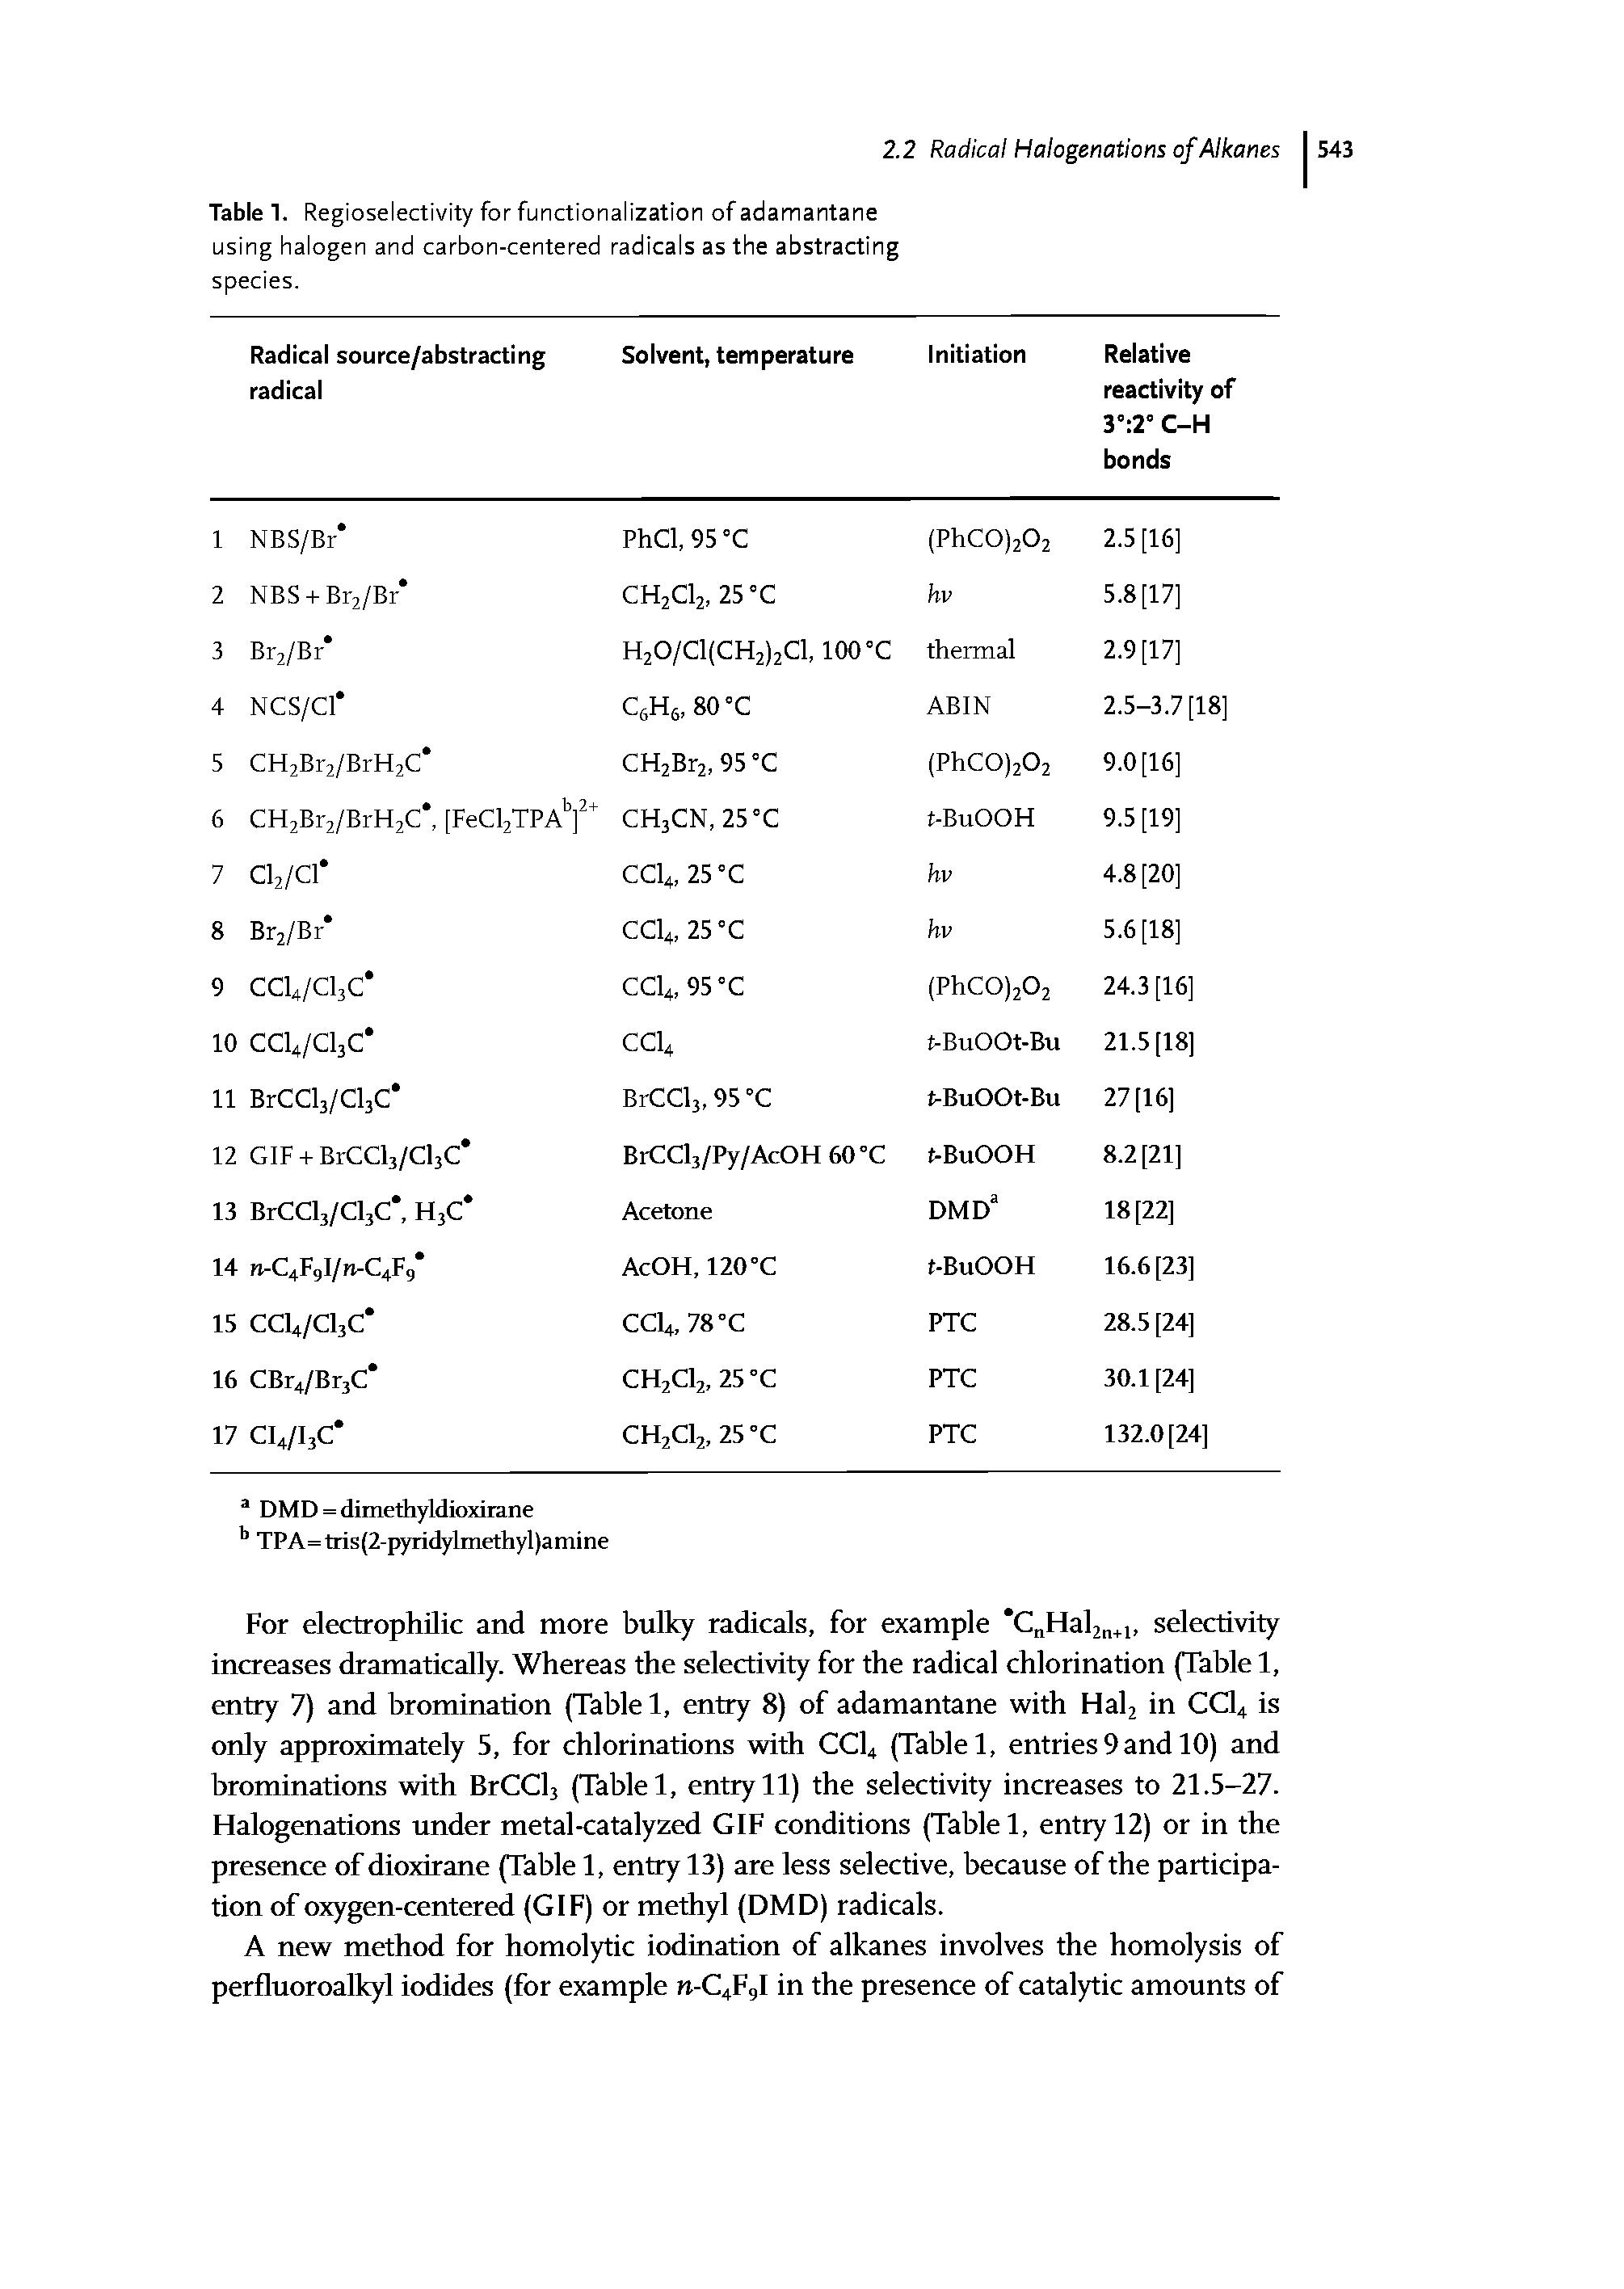 Table 1. Regioselectivity for functionalization of adamantane using halogen and carbon-centered radicals as the abstracting species.